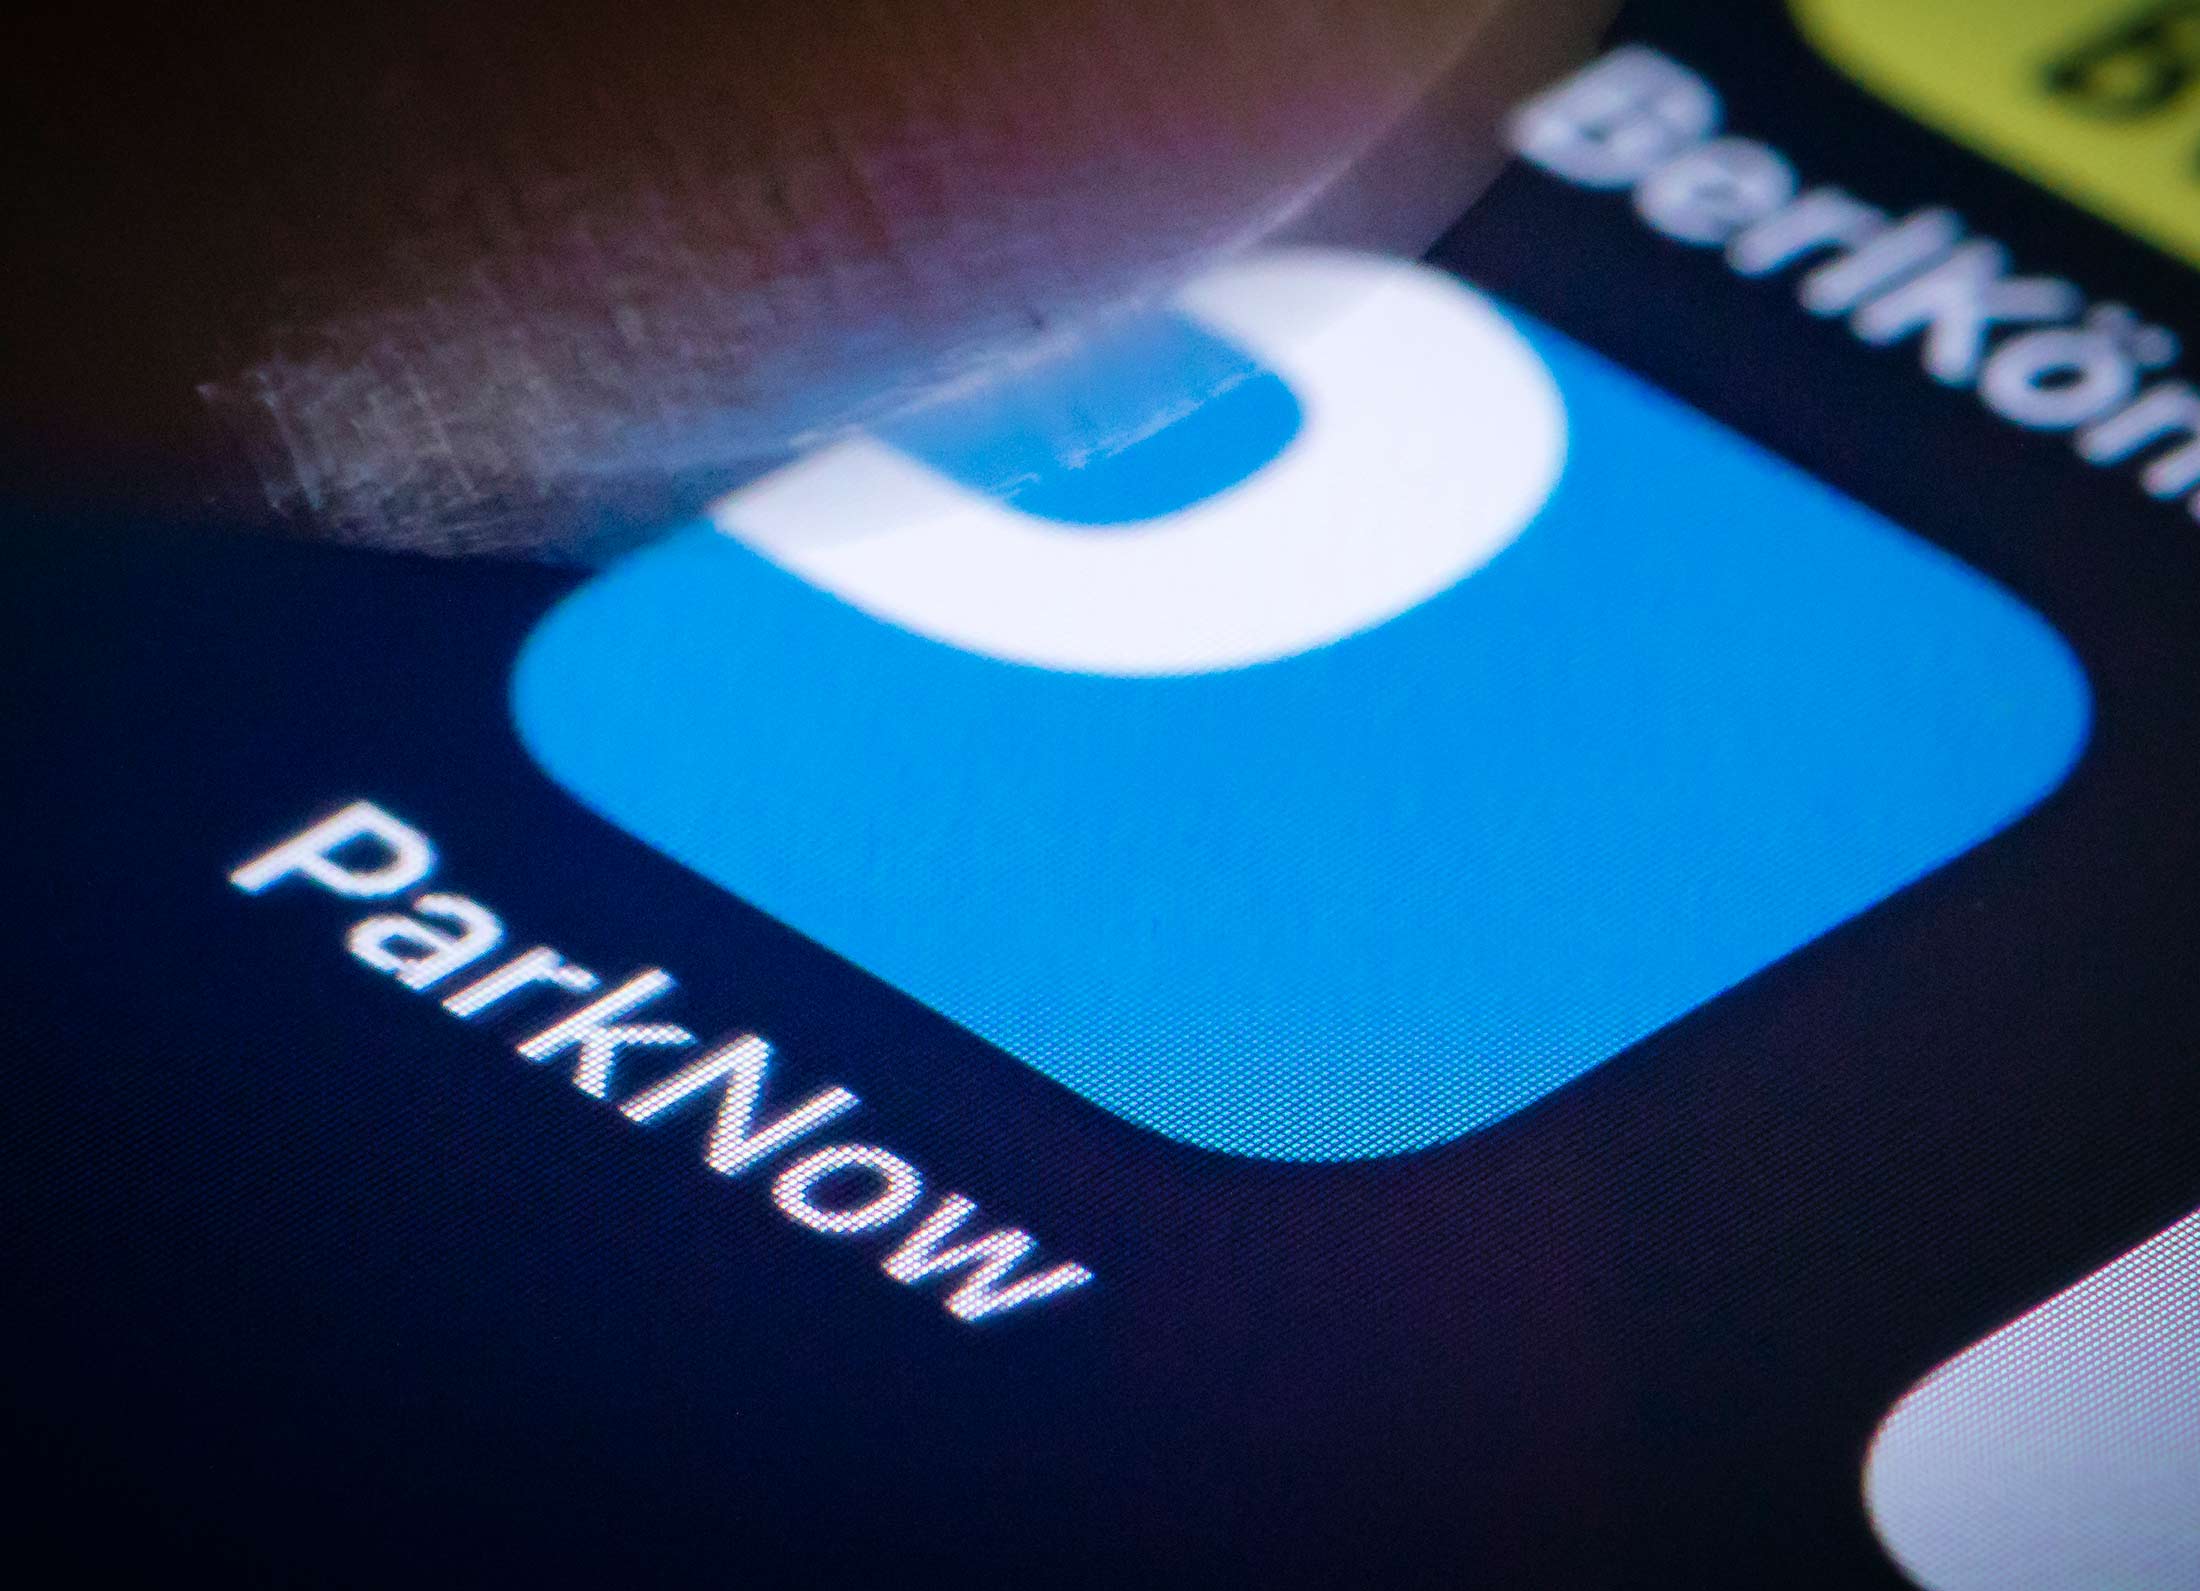 The ParkNow app